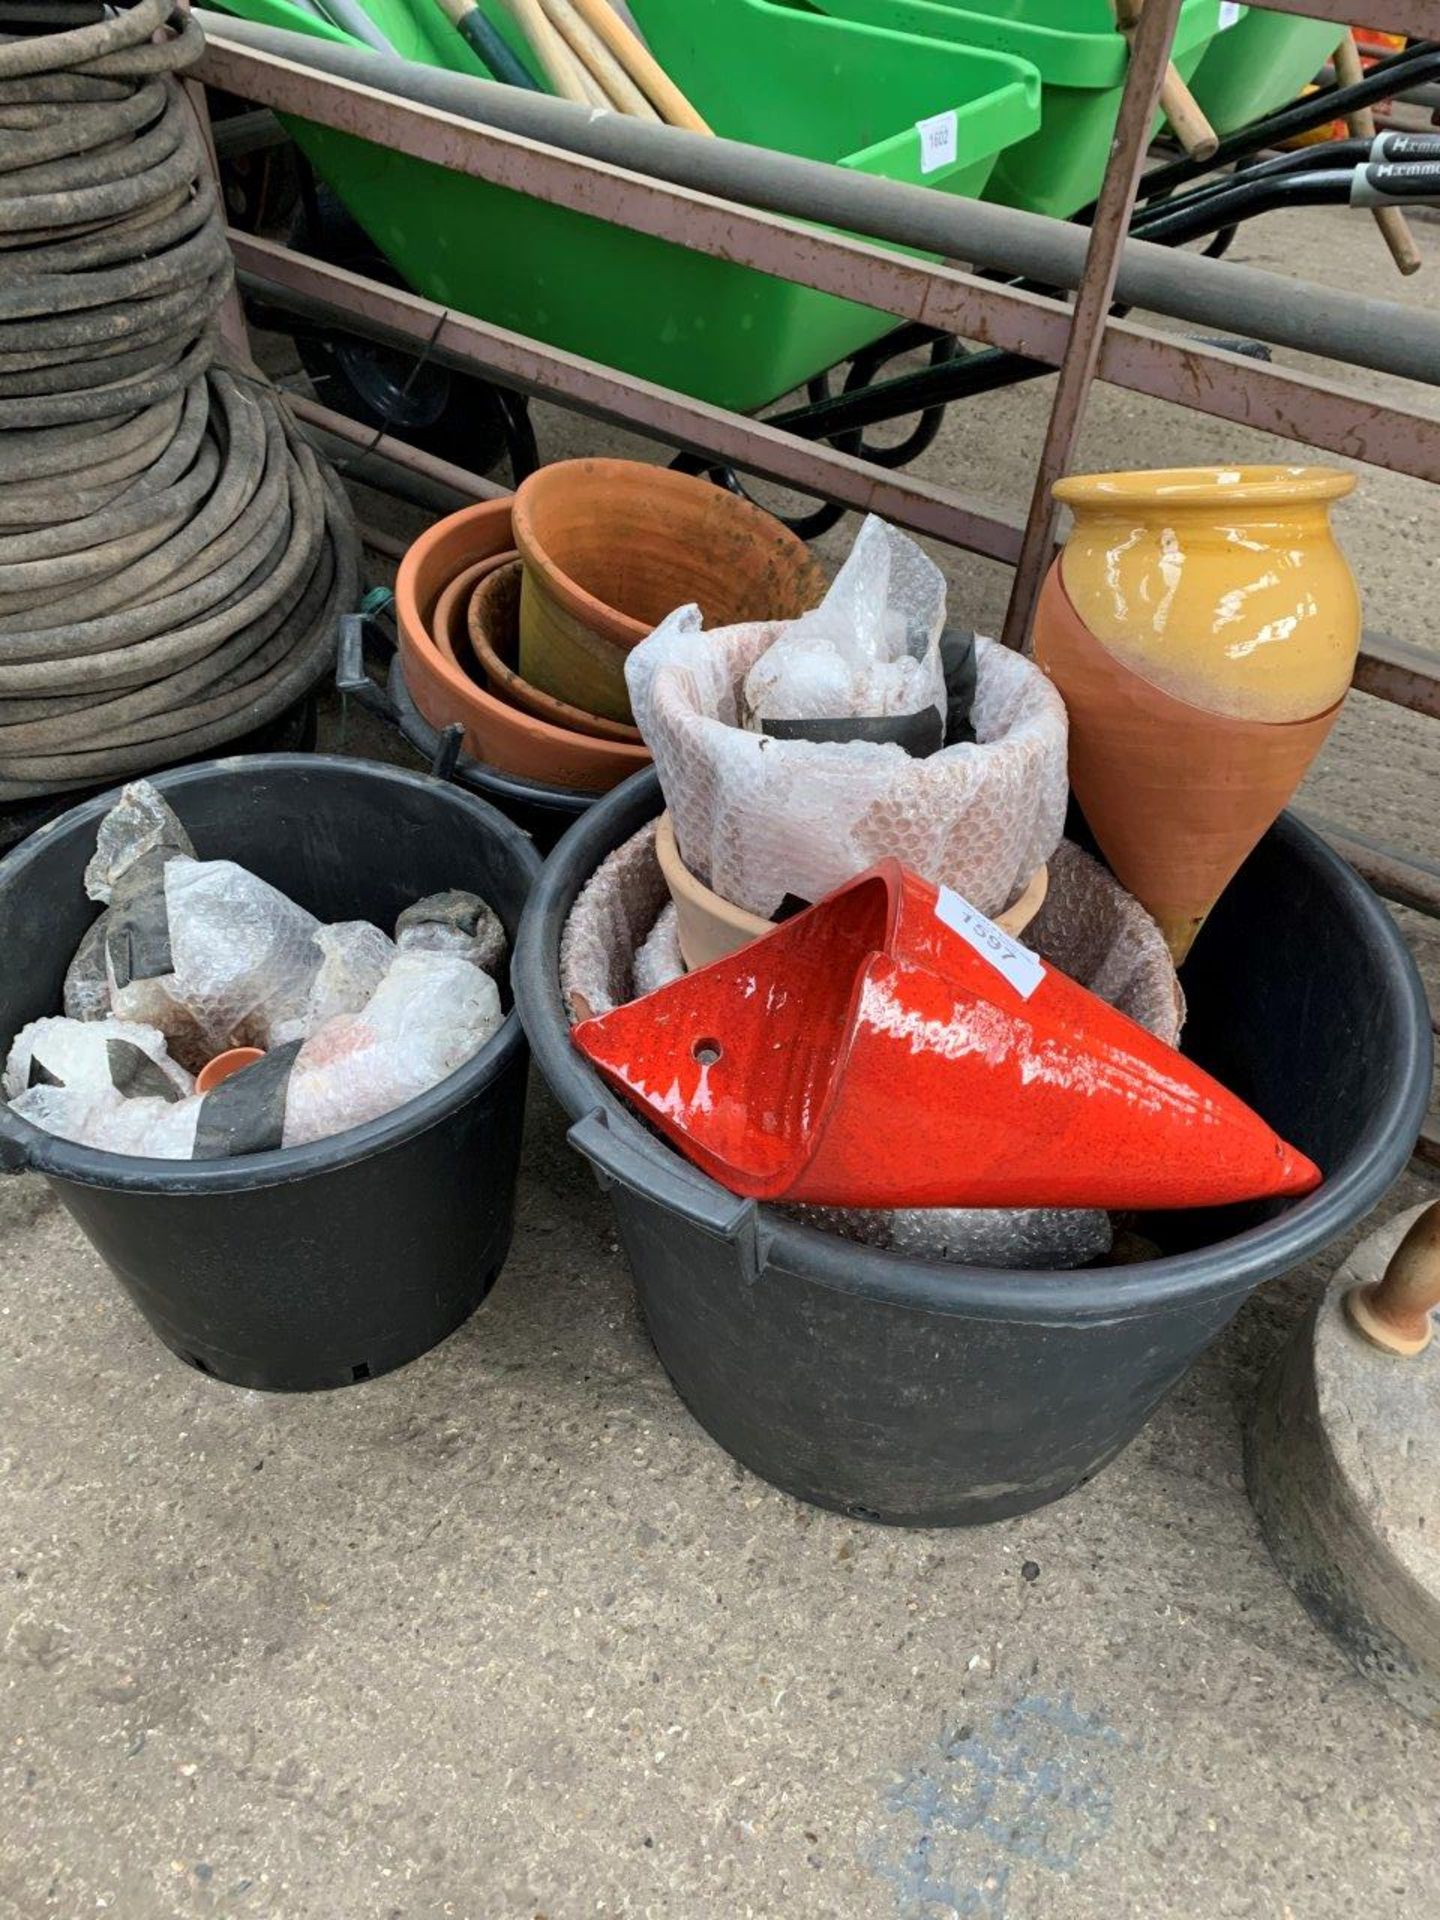 Quantity of glazed flower pots and wall pots.